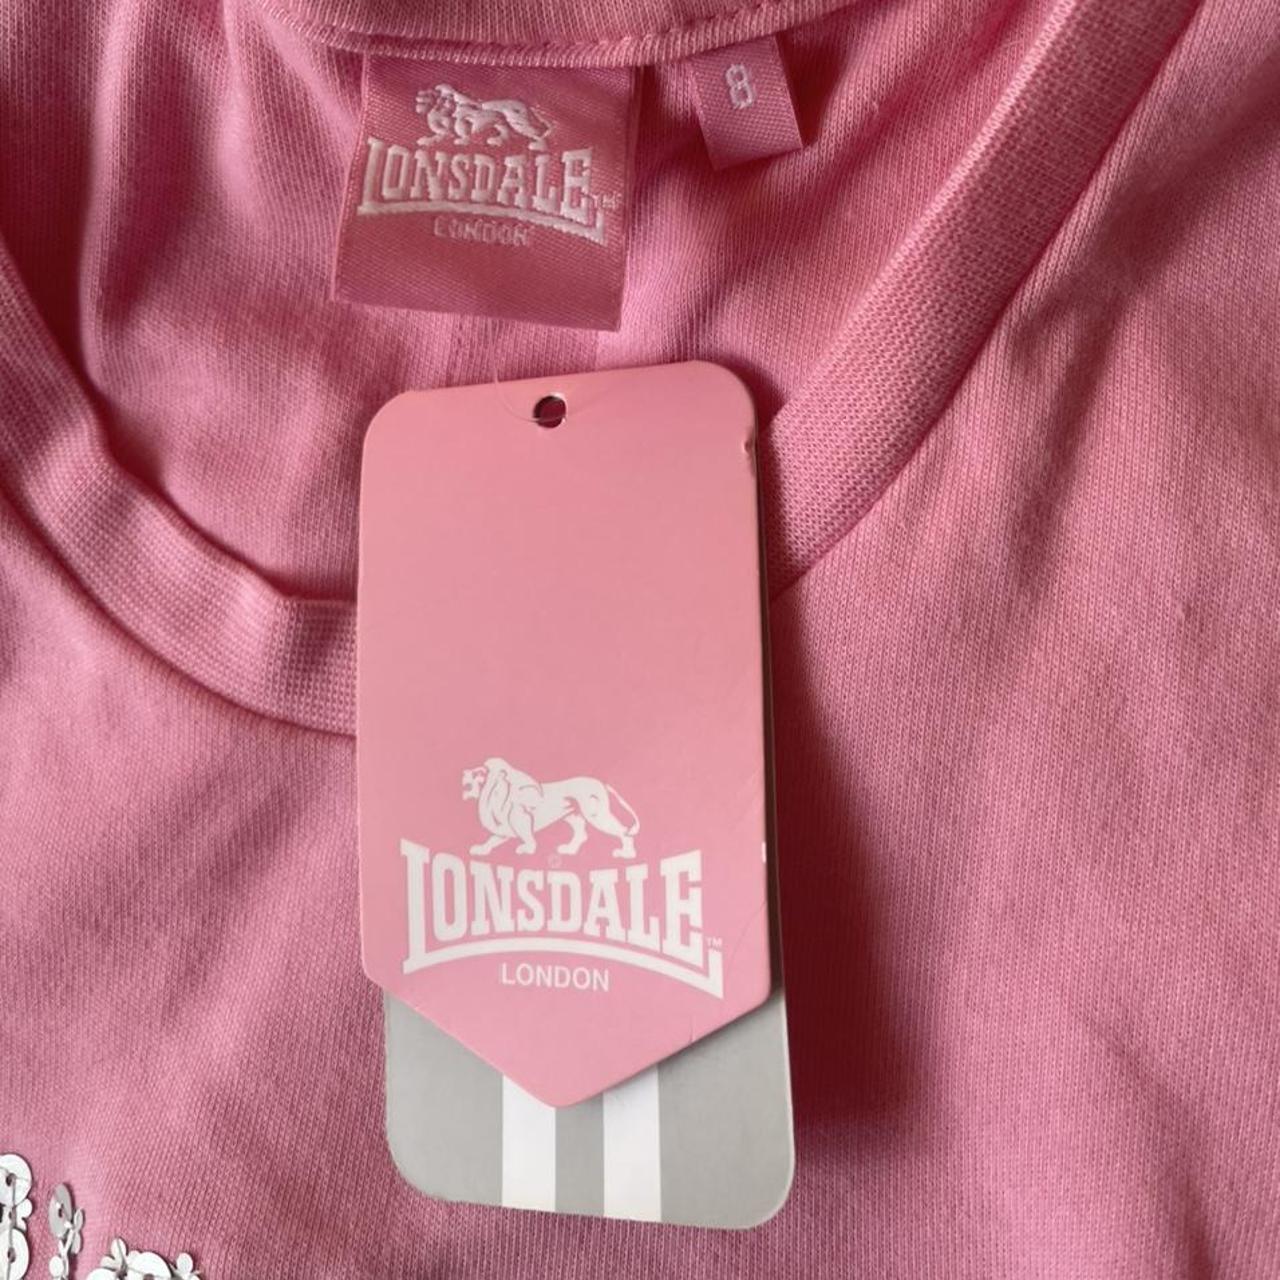 Product Image 2 - Pink tank top Lonsdale

Lonsdale brand